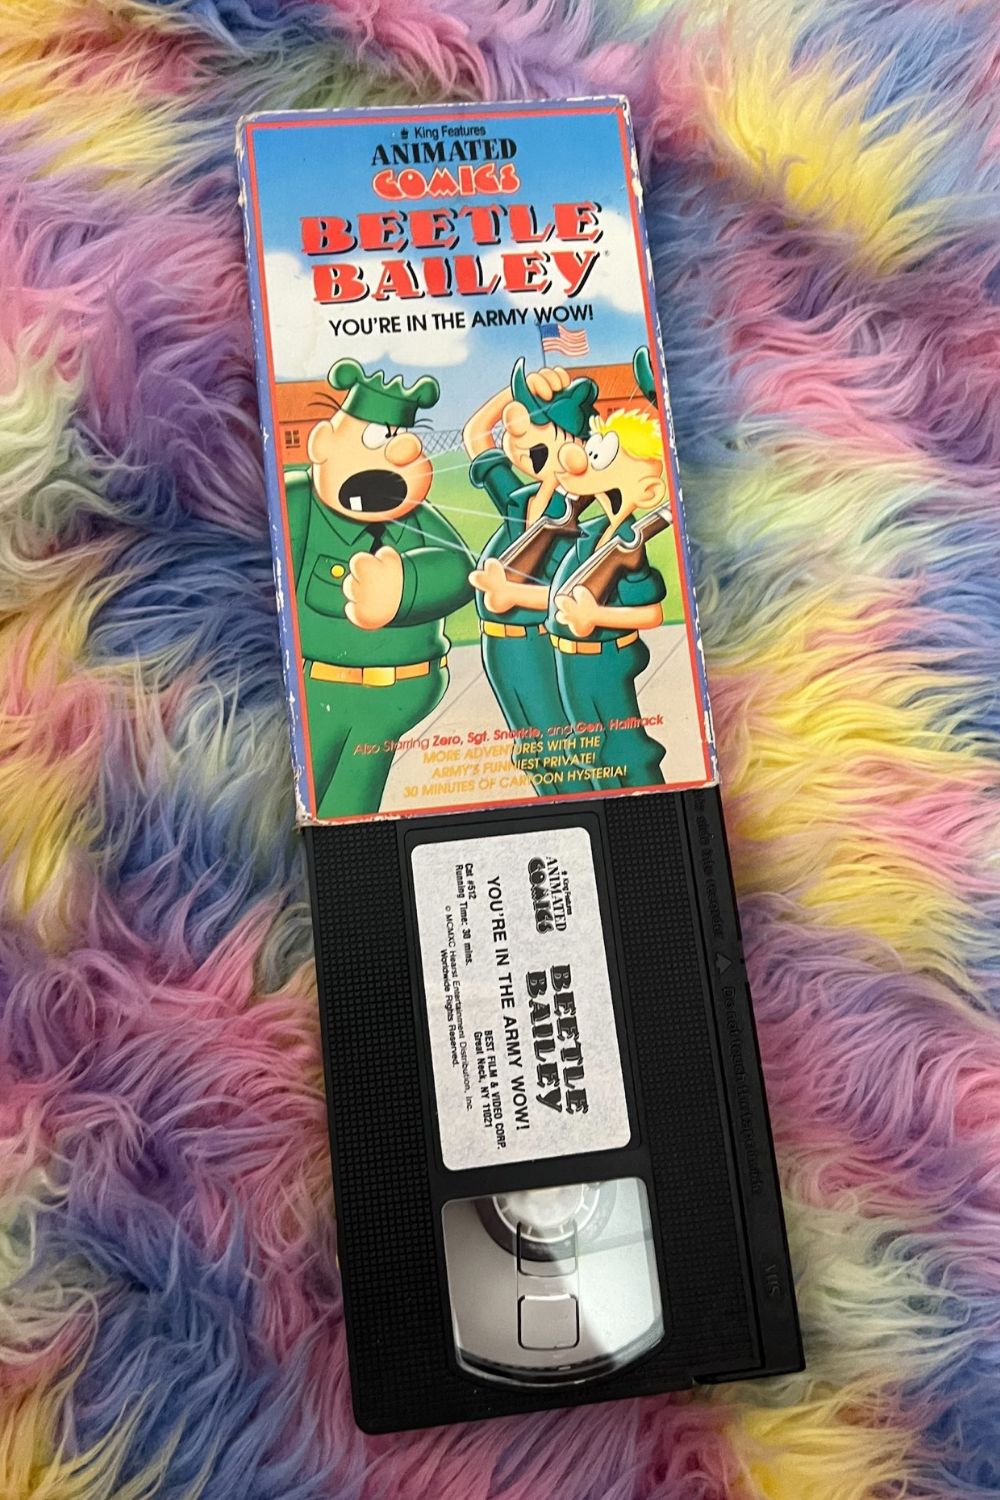 BEETLE BAILEY VHS - You're in the Army Now